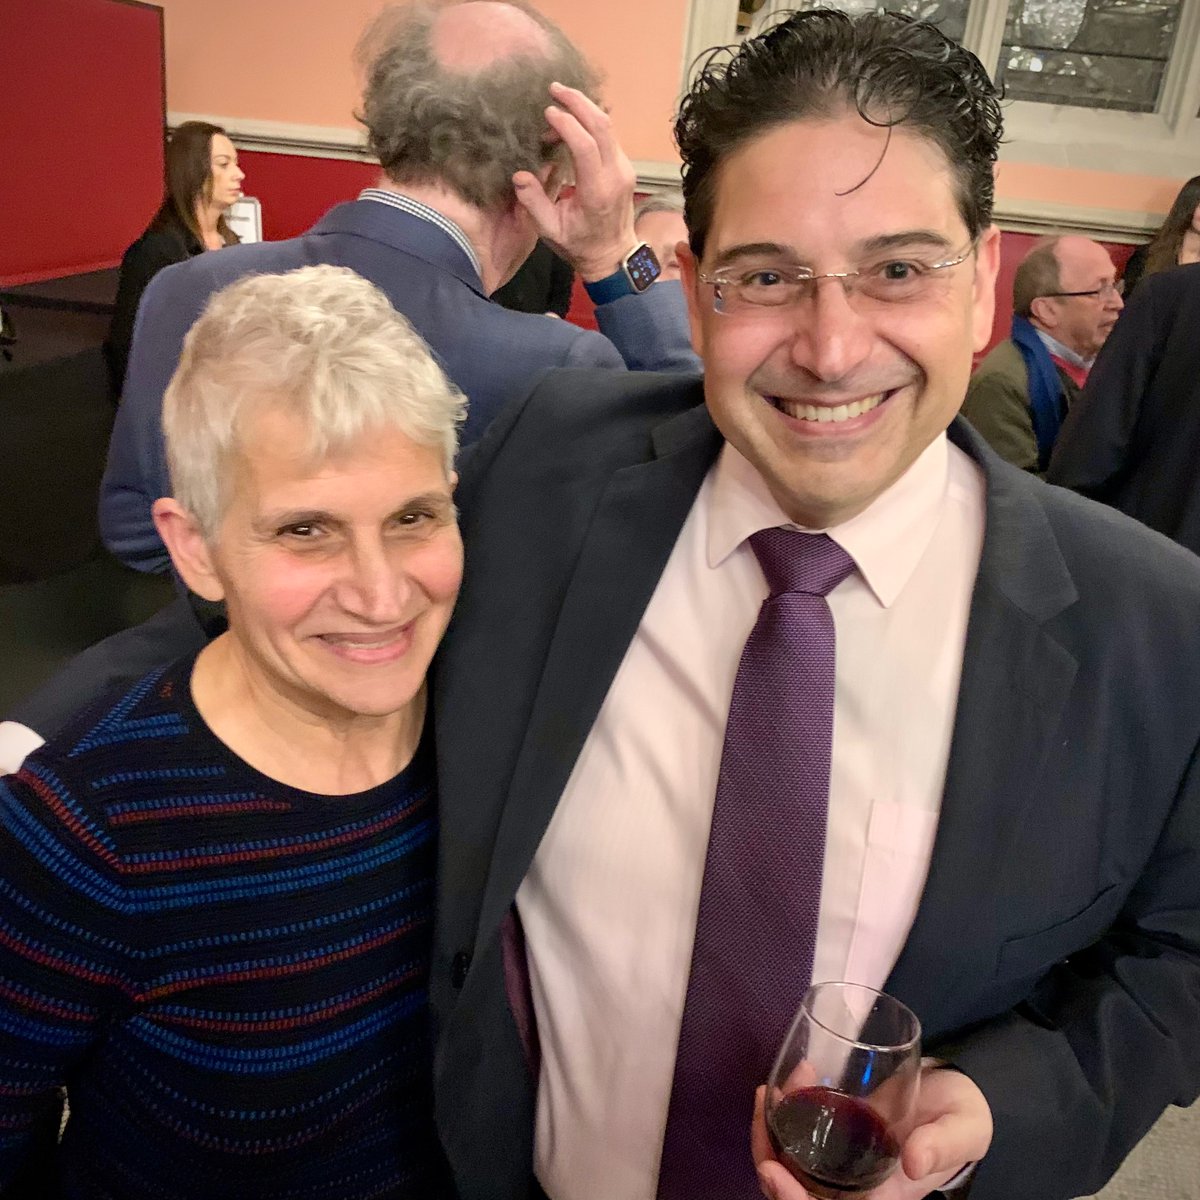 Truly humbled to meet Dame Claire Gerada @ClareGerada — founder of @NHSPracHealth, a lifeline for doctors & dentists' well-being in our strained health system Her Maltese heritage makes it even more special. A genuine force of nature in healthcare. #InnovativeCare #MalteseLegacy